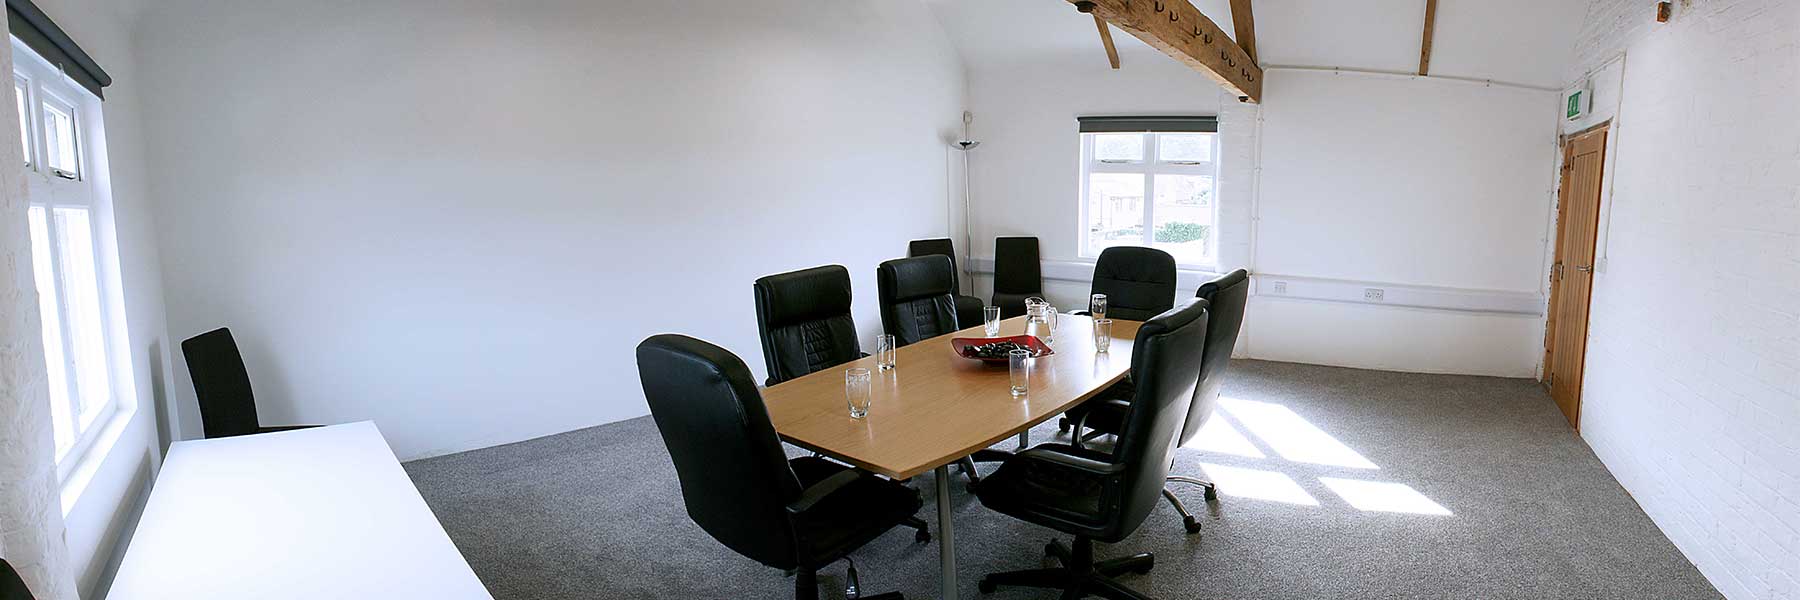 Meeting Room for Business Use